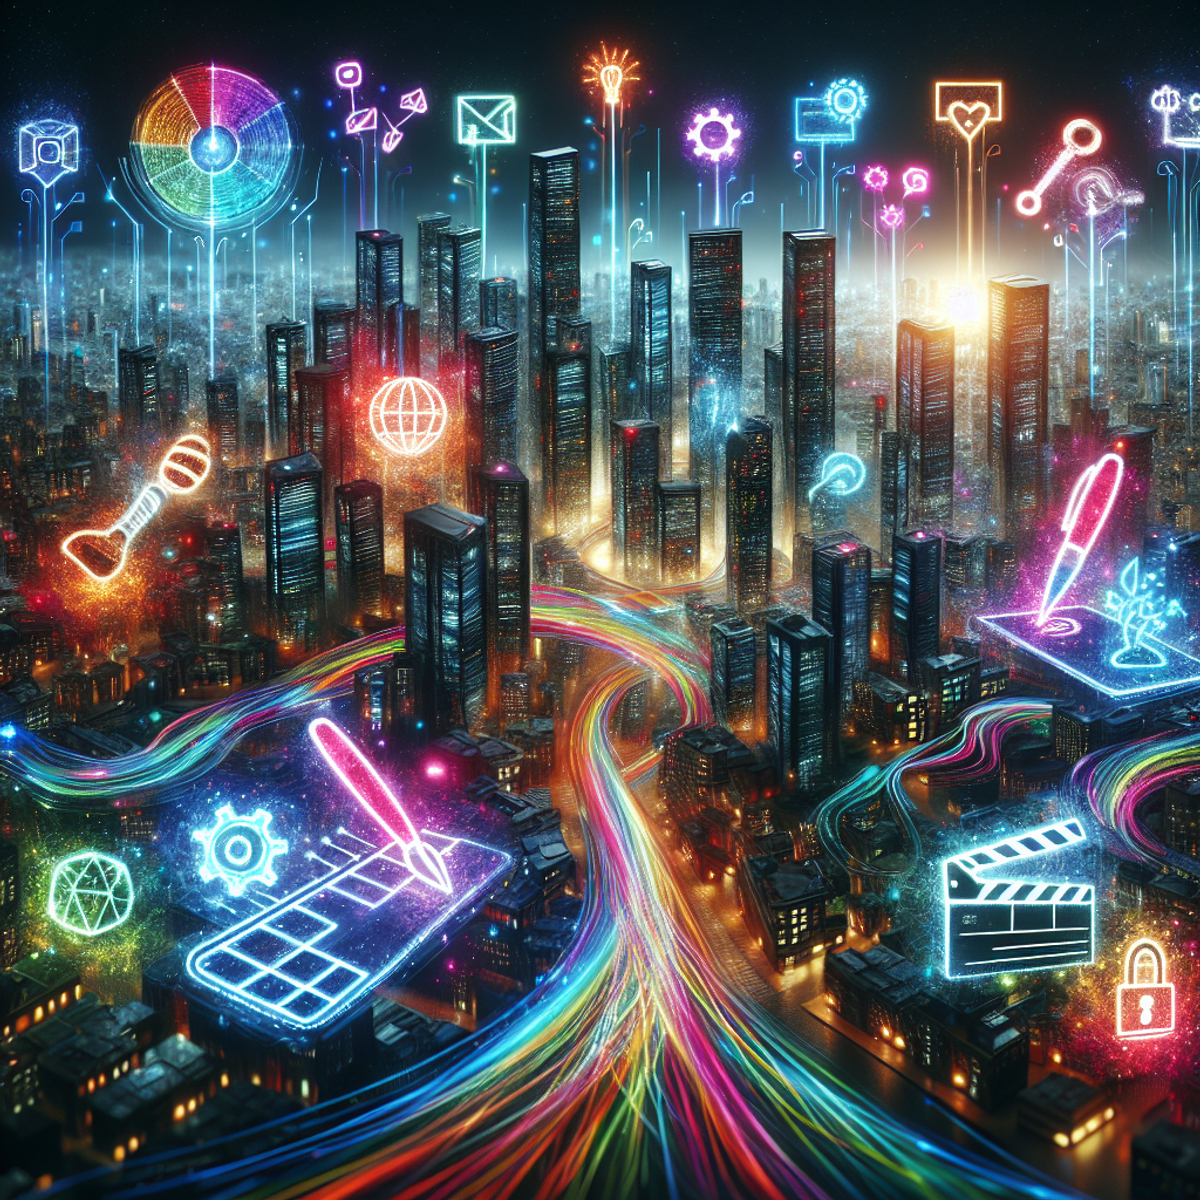 A futuristic cityscape with energy-efficient skyscrapers and neon lights, featuring symbols of web development, digital art, online mechanical operations, entertainment, film creation, and cybersecurity.